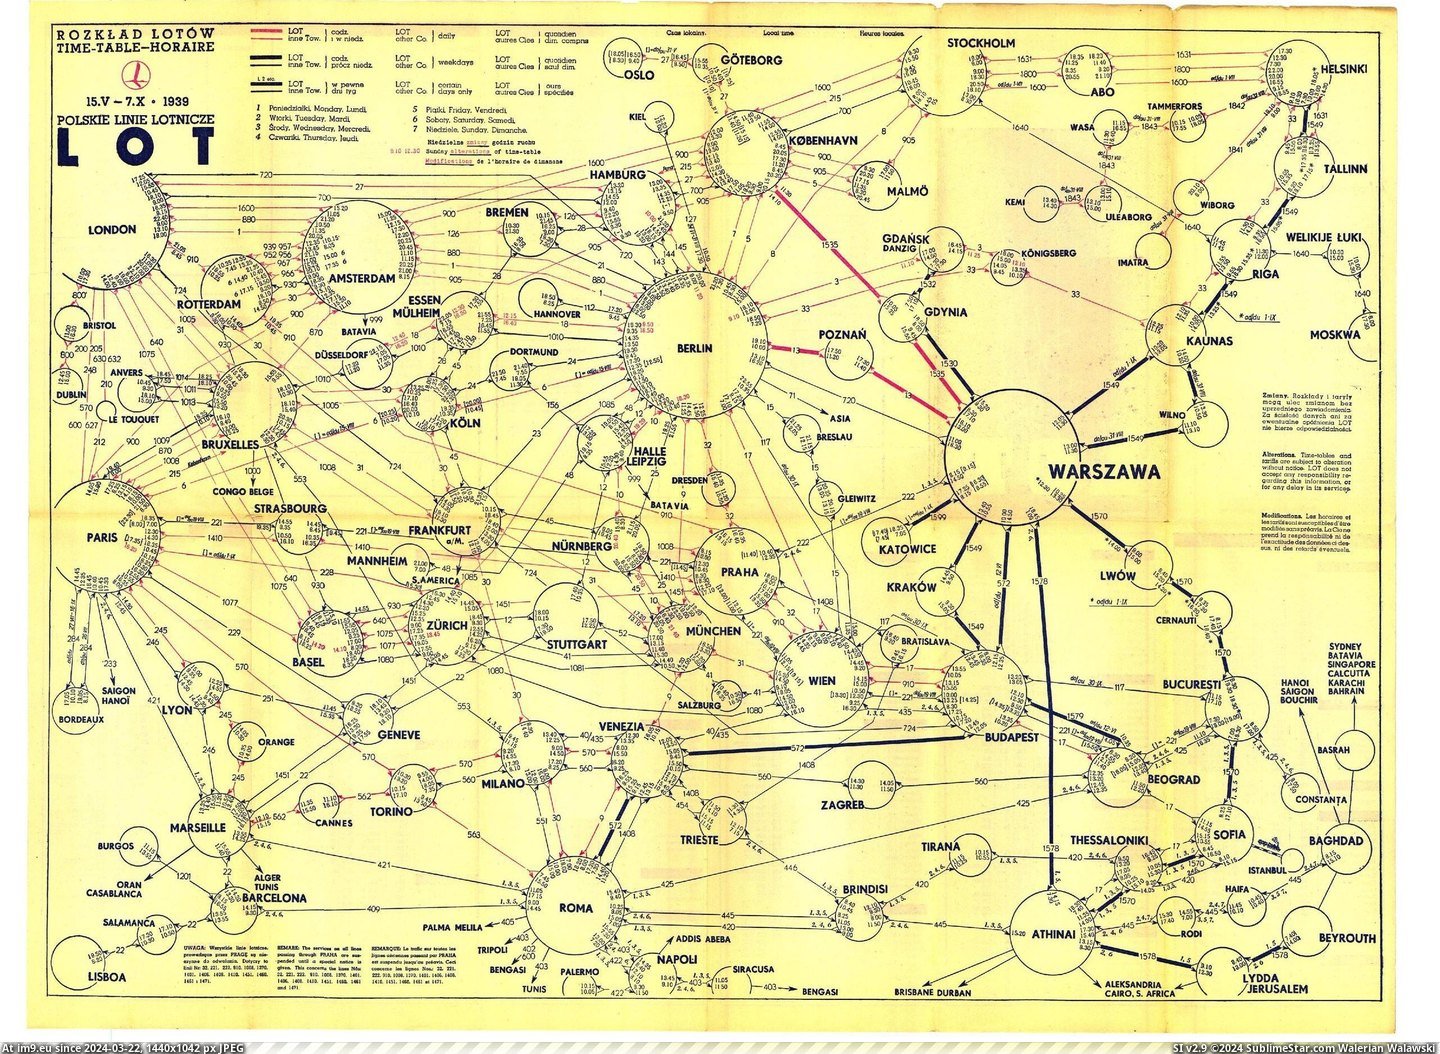 #World #Map #Months #Routes #Airlines #Lot #Polish #War [Mapporn] Map of routes of LOT Polish Airlines in last months before World War II [3662x2667] Pic. (Изображение из альбом My r/MAPS favs))